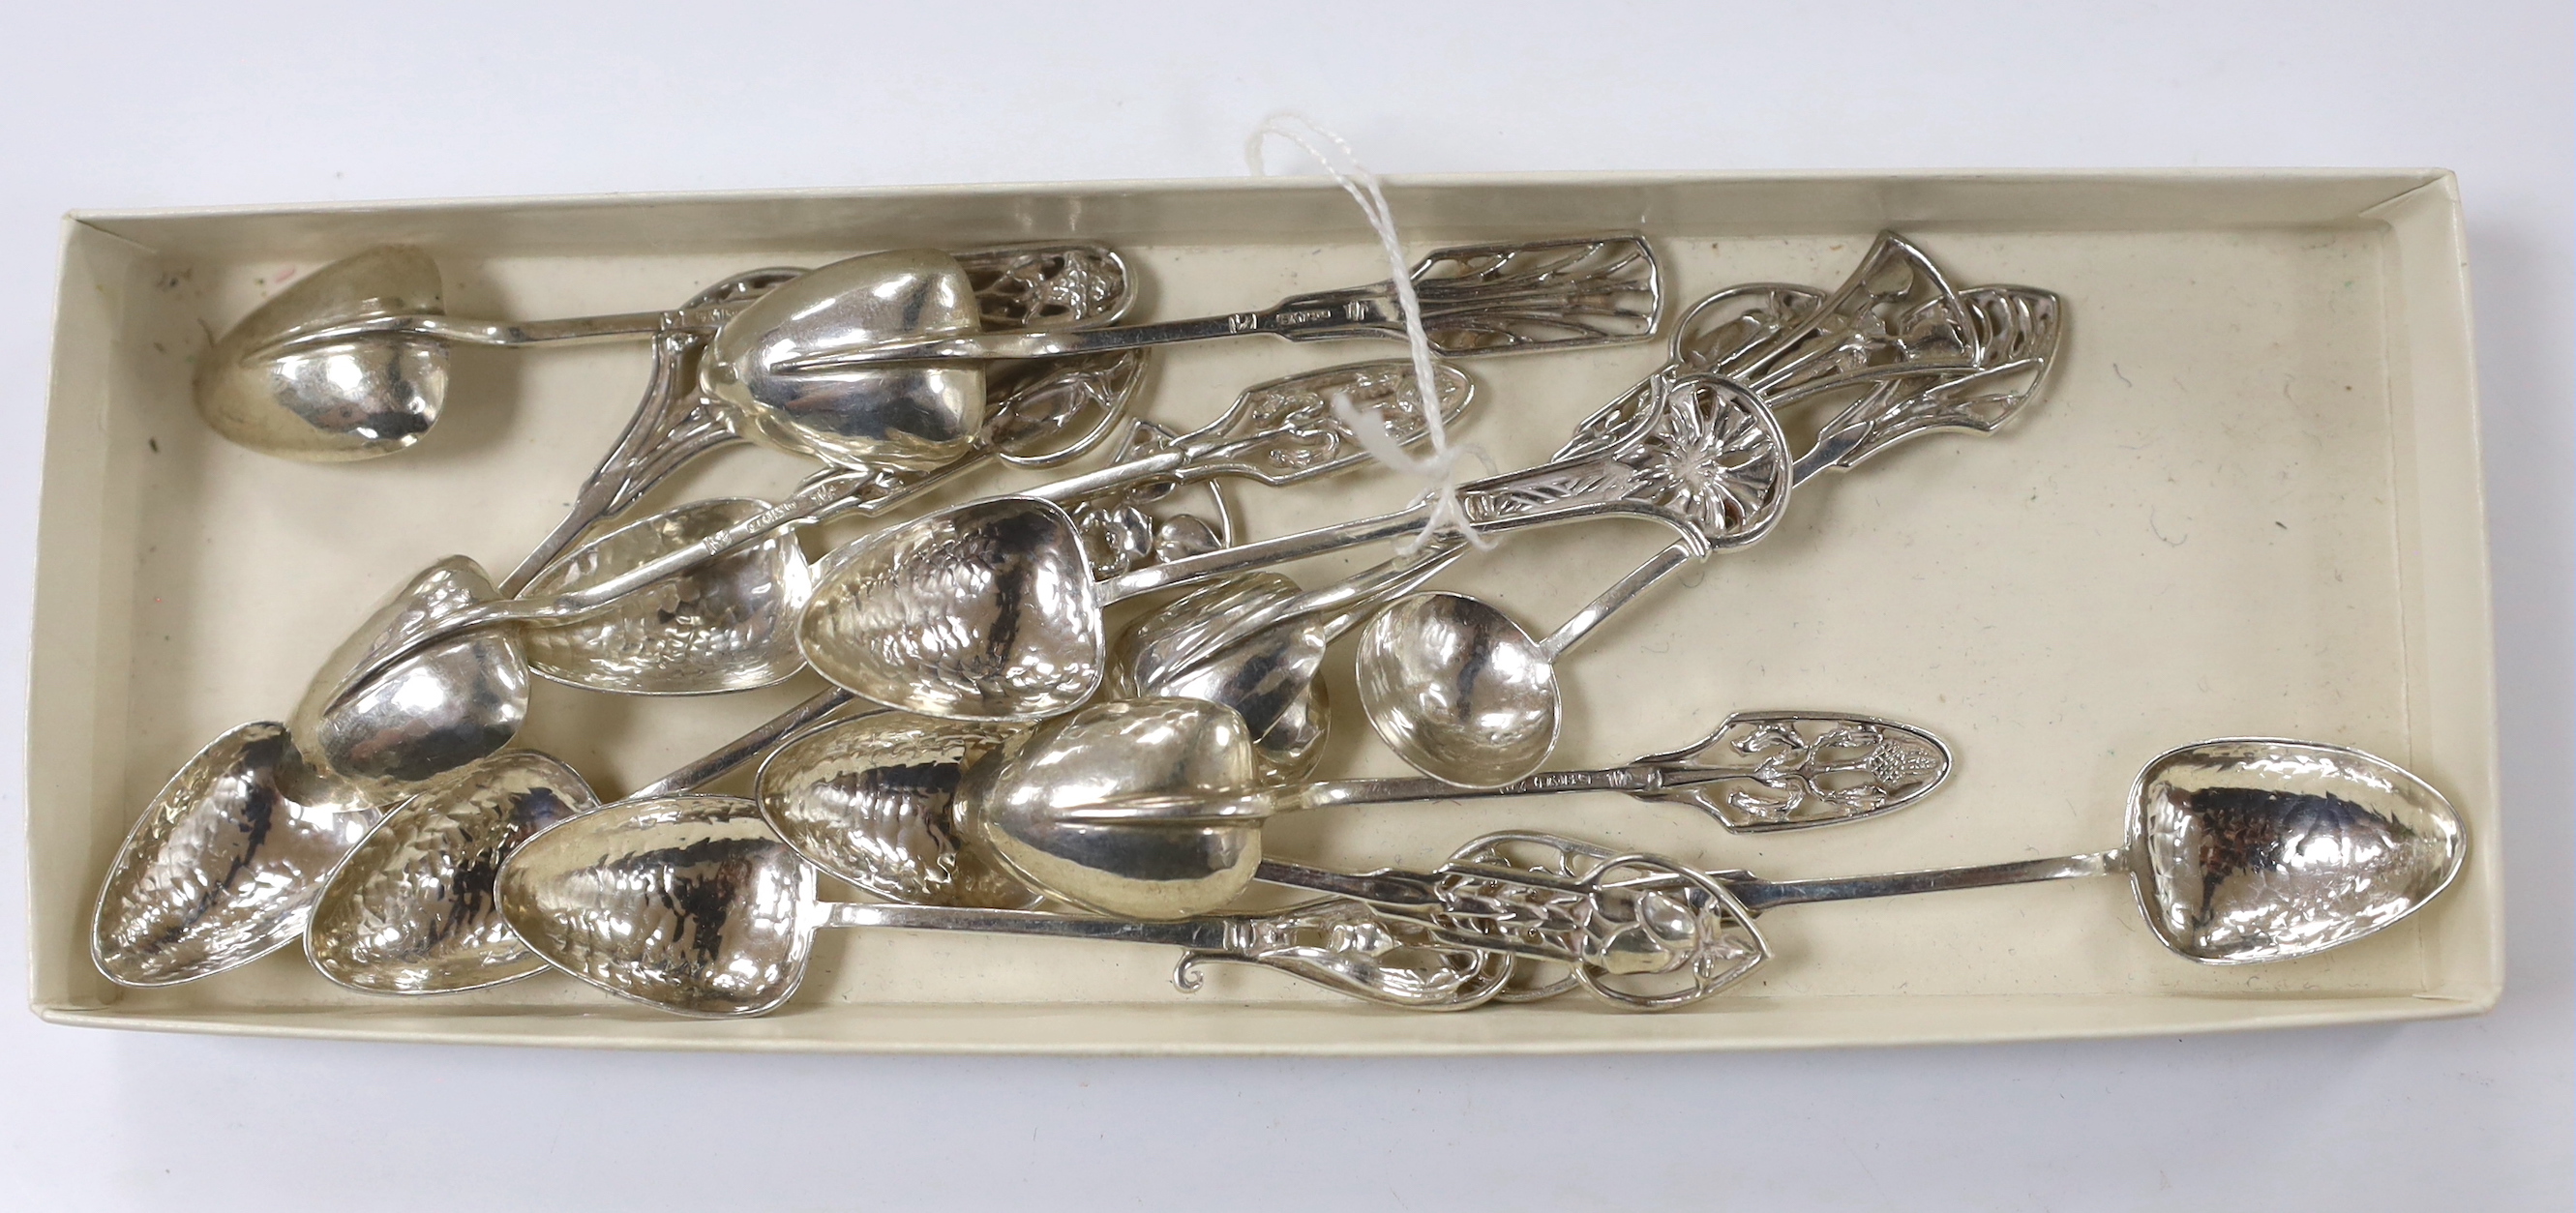 Fourteen Australian Arts & Crafts small sterling spoons by James A. Linton, with planished bowls and differing floral terminals, largest 86mm, 3.4oz.                                                                       